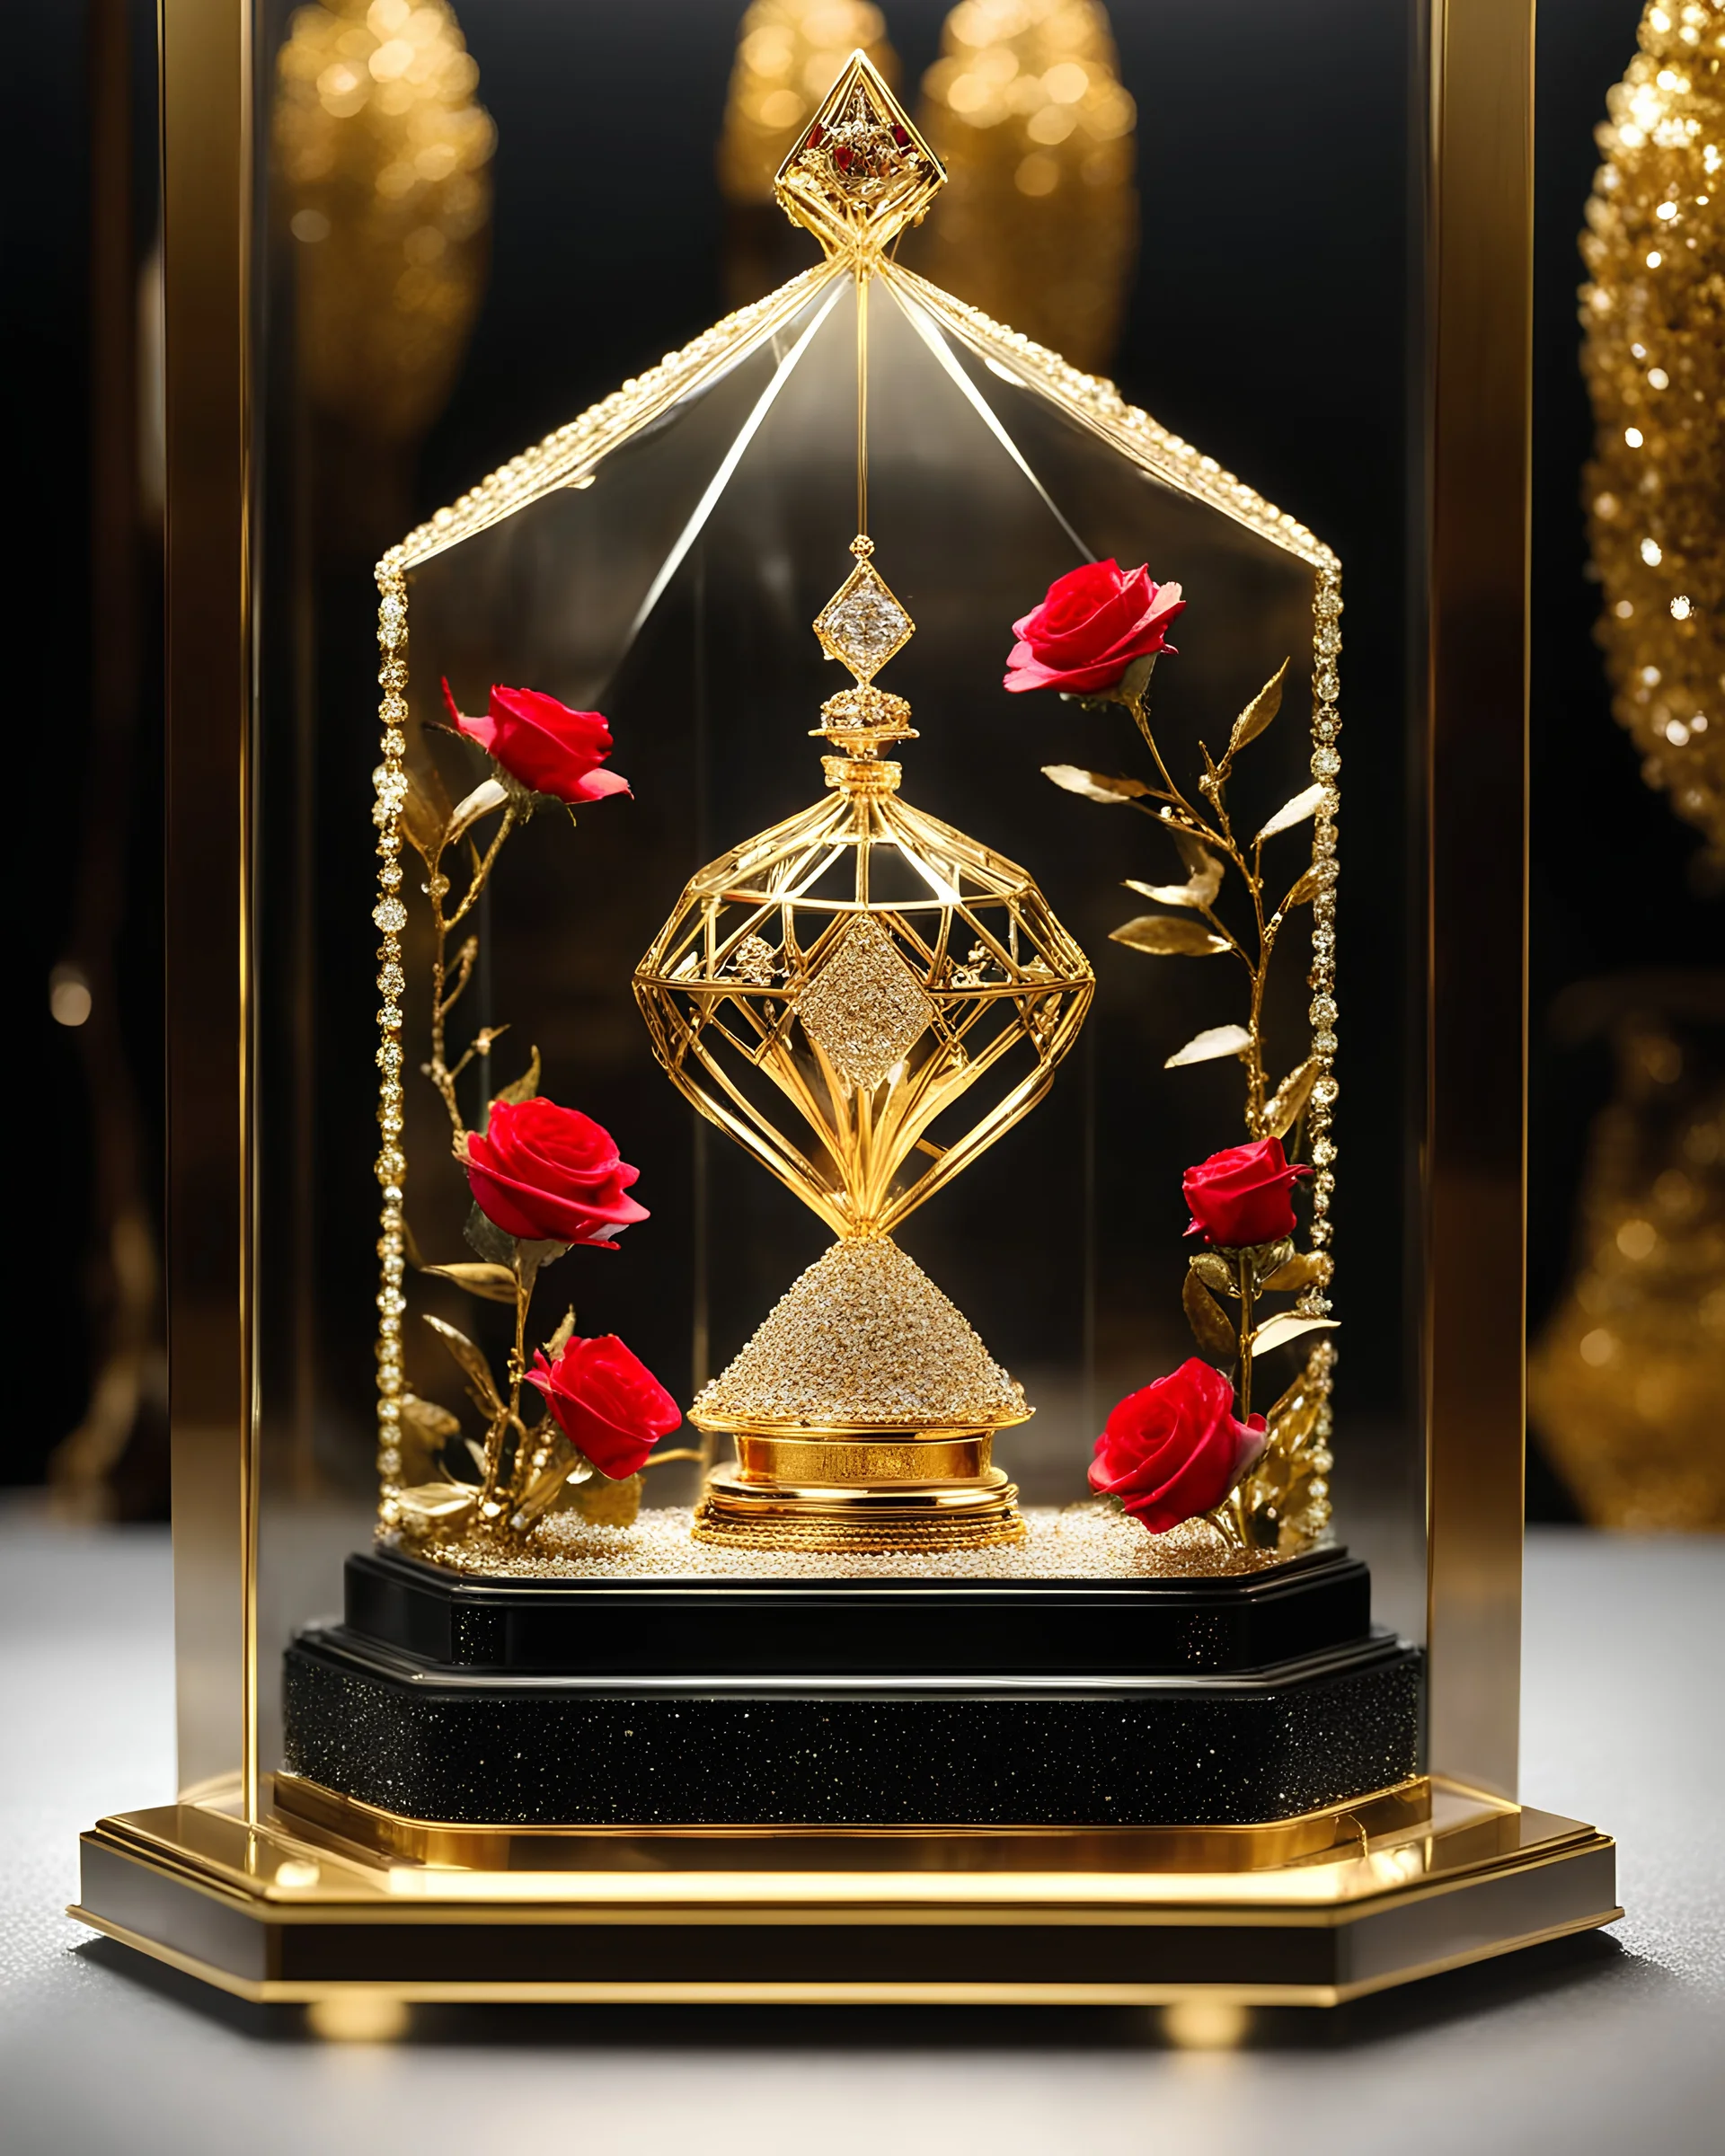 Luxury design of miniature music in a luxury glass display case, singer sing song made of gold metal plate, metal craft with luminous diamond glitter, on the outside surface of luxury jewelry decoration very small diamond stones, very small abstract queen logo, 3D logo shape, musical notes, red diamond stones, black decoration, leaves and roses combined, emitting light, gold background